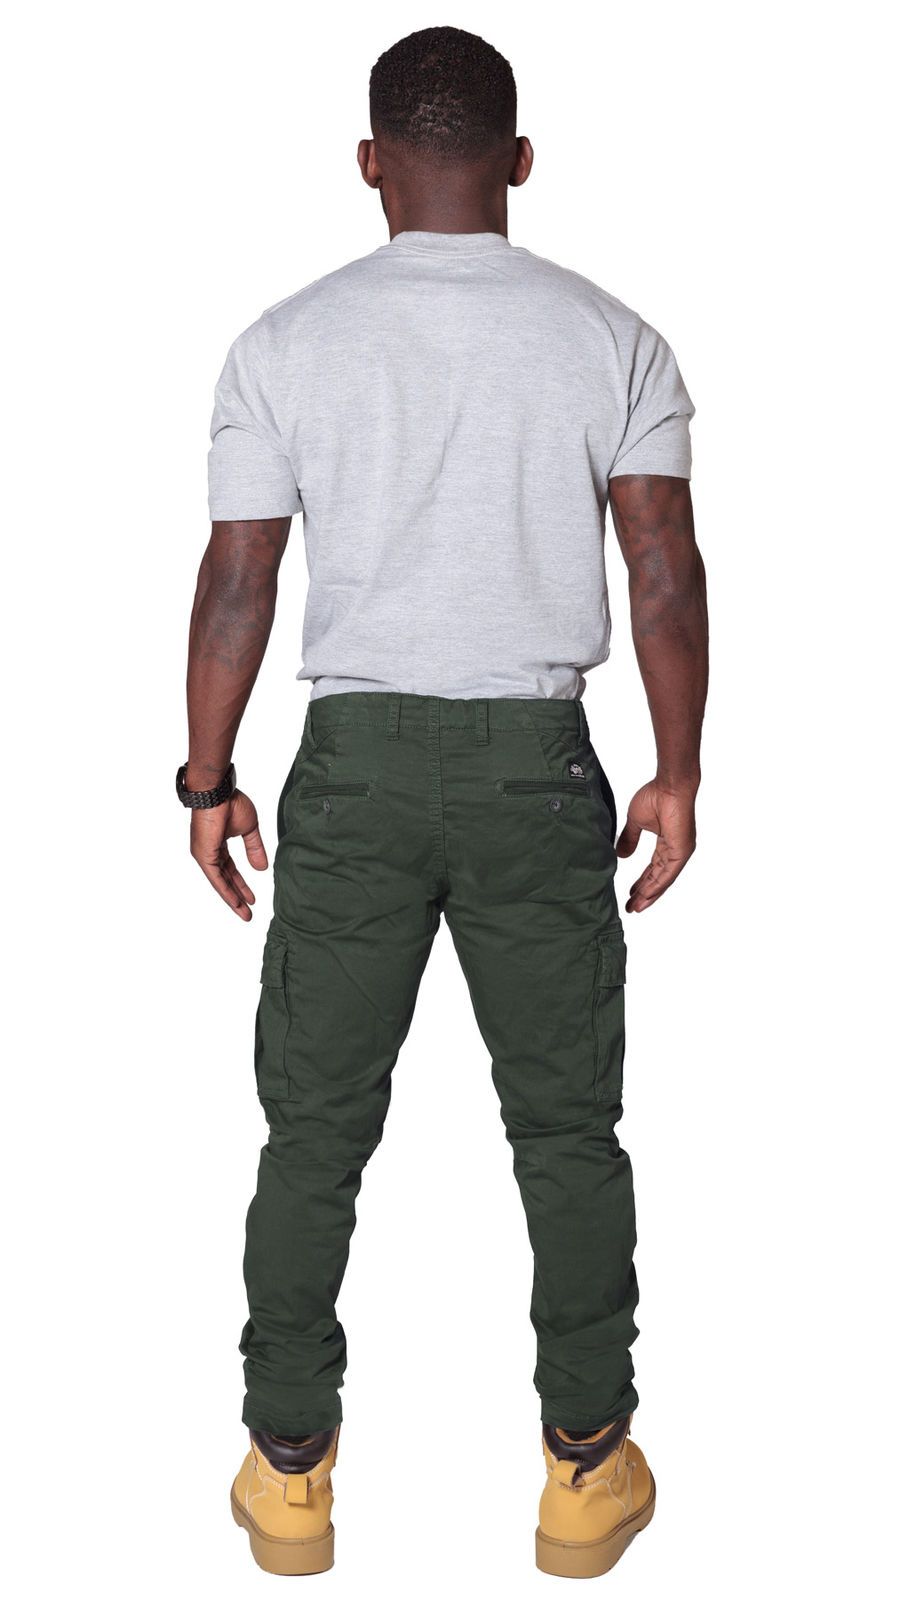 Rear view of ‘Pete’ style, casual cotton mix cargo trousers in khaki-green with view of back pockets from Dungarees Online.